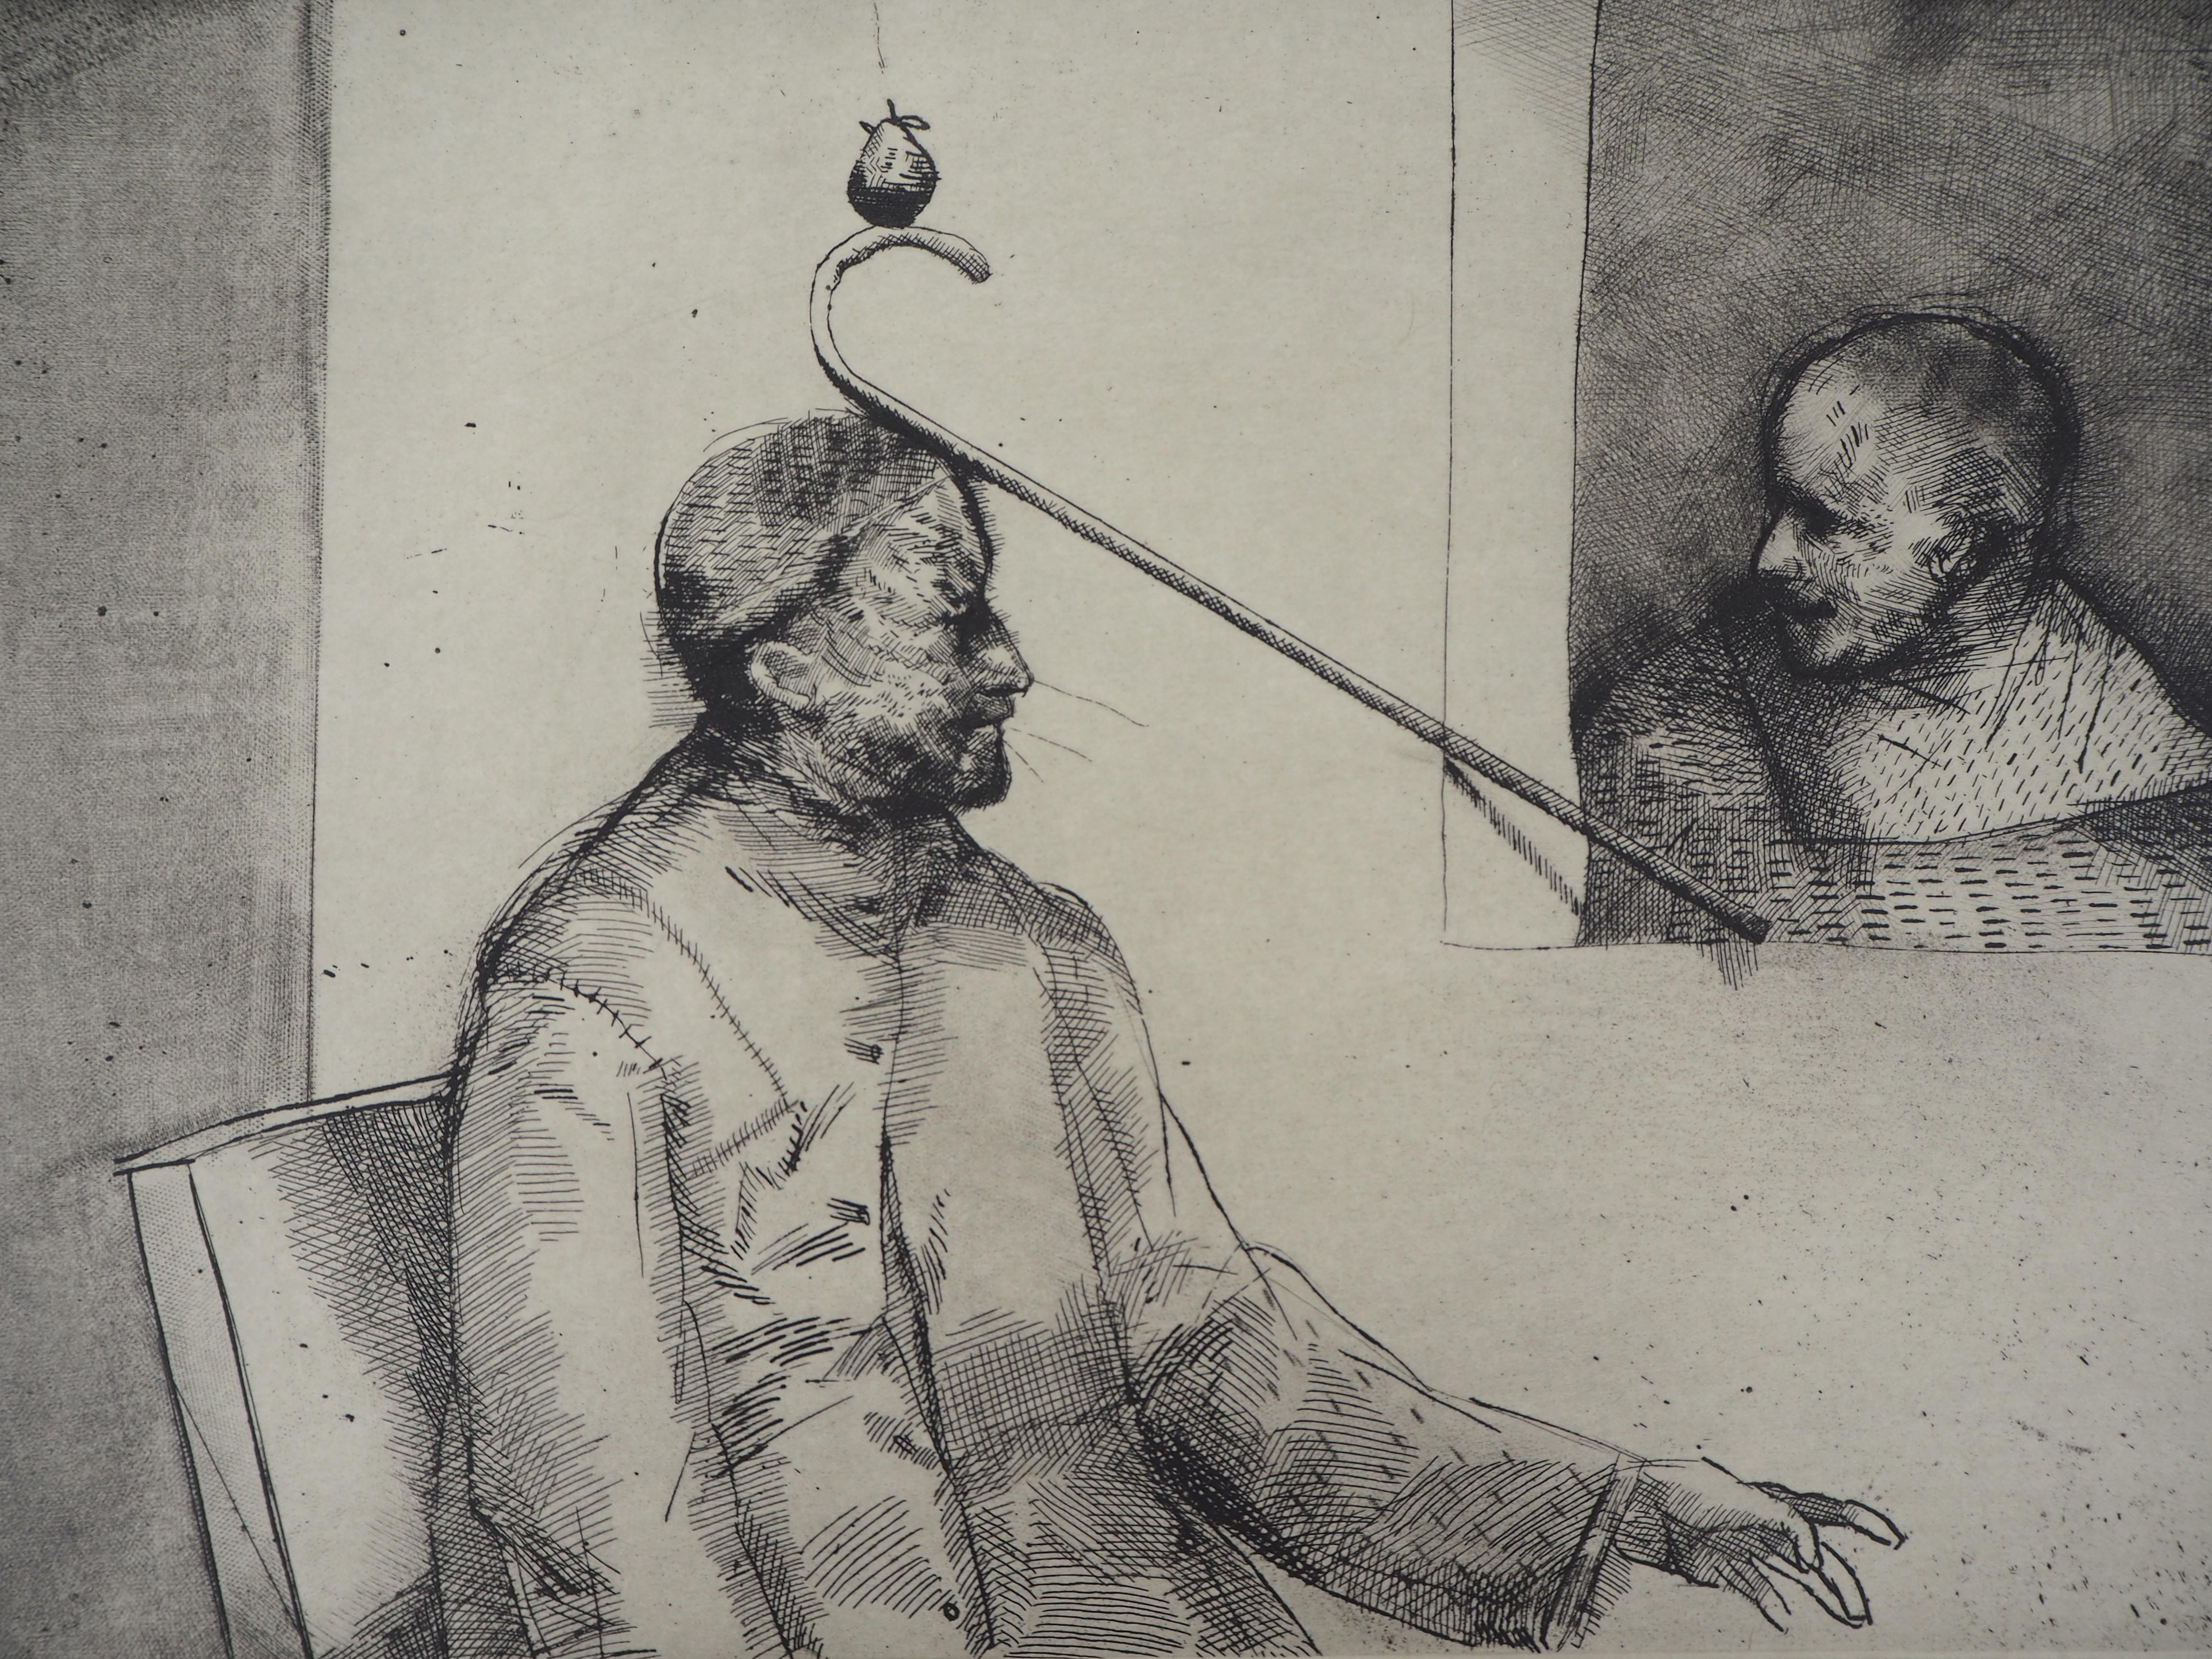 The Balance of Pear - Original handsigned etching, Limited / 100 - Modern Print by Miguel Conde